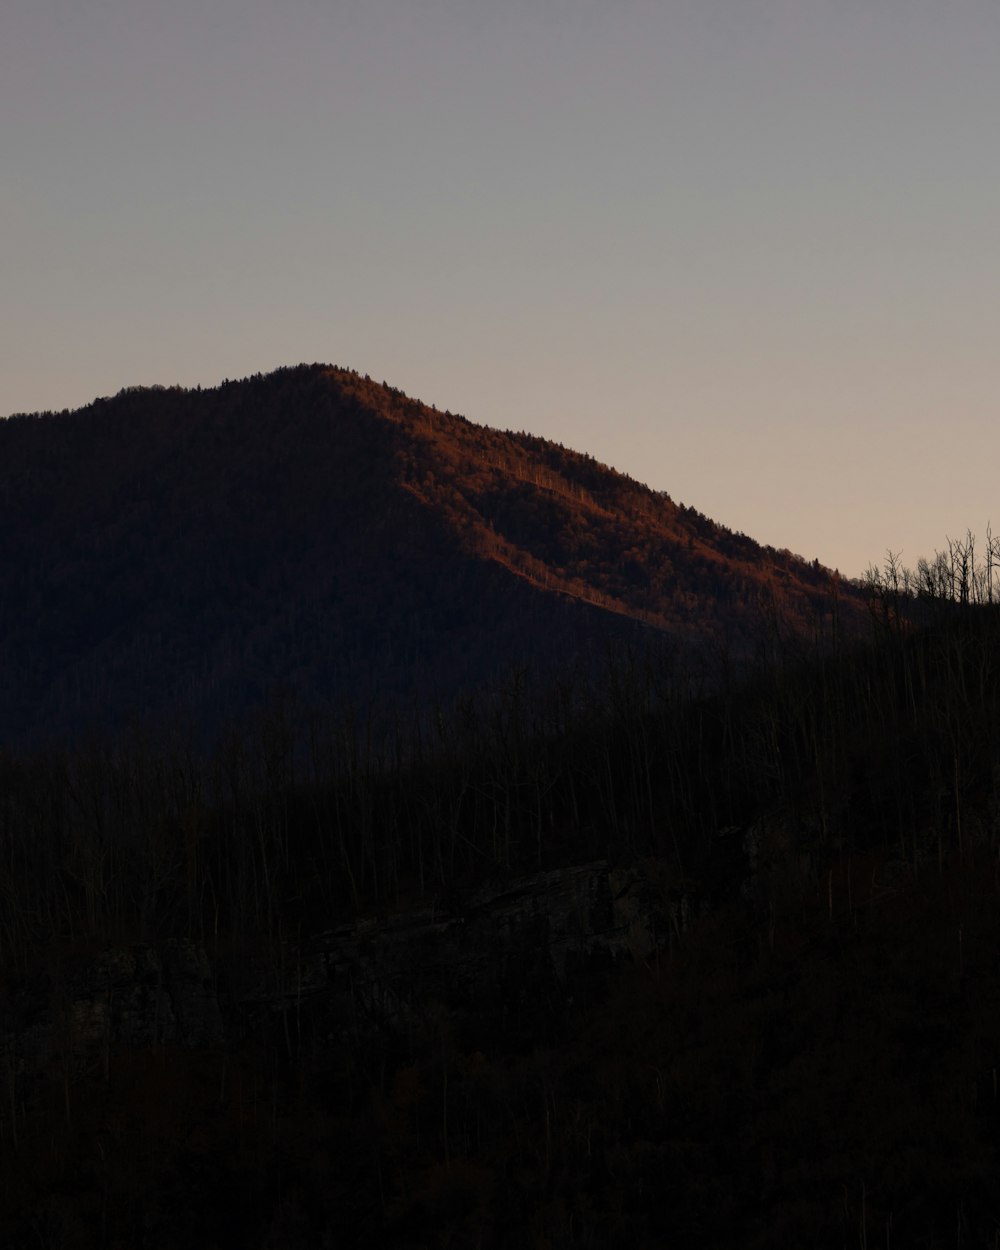 a silhouette of a mountain with trees in the foreground